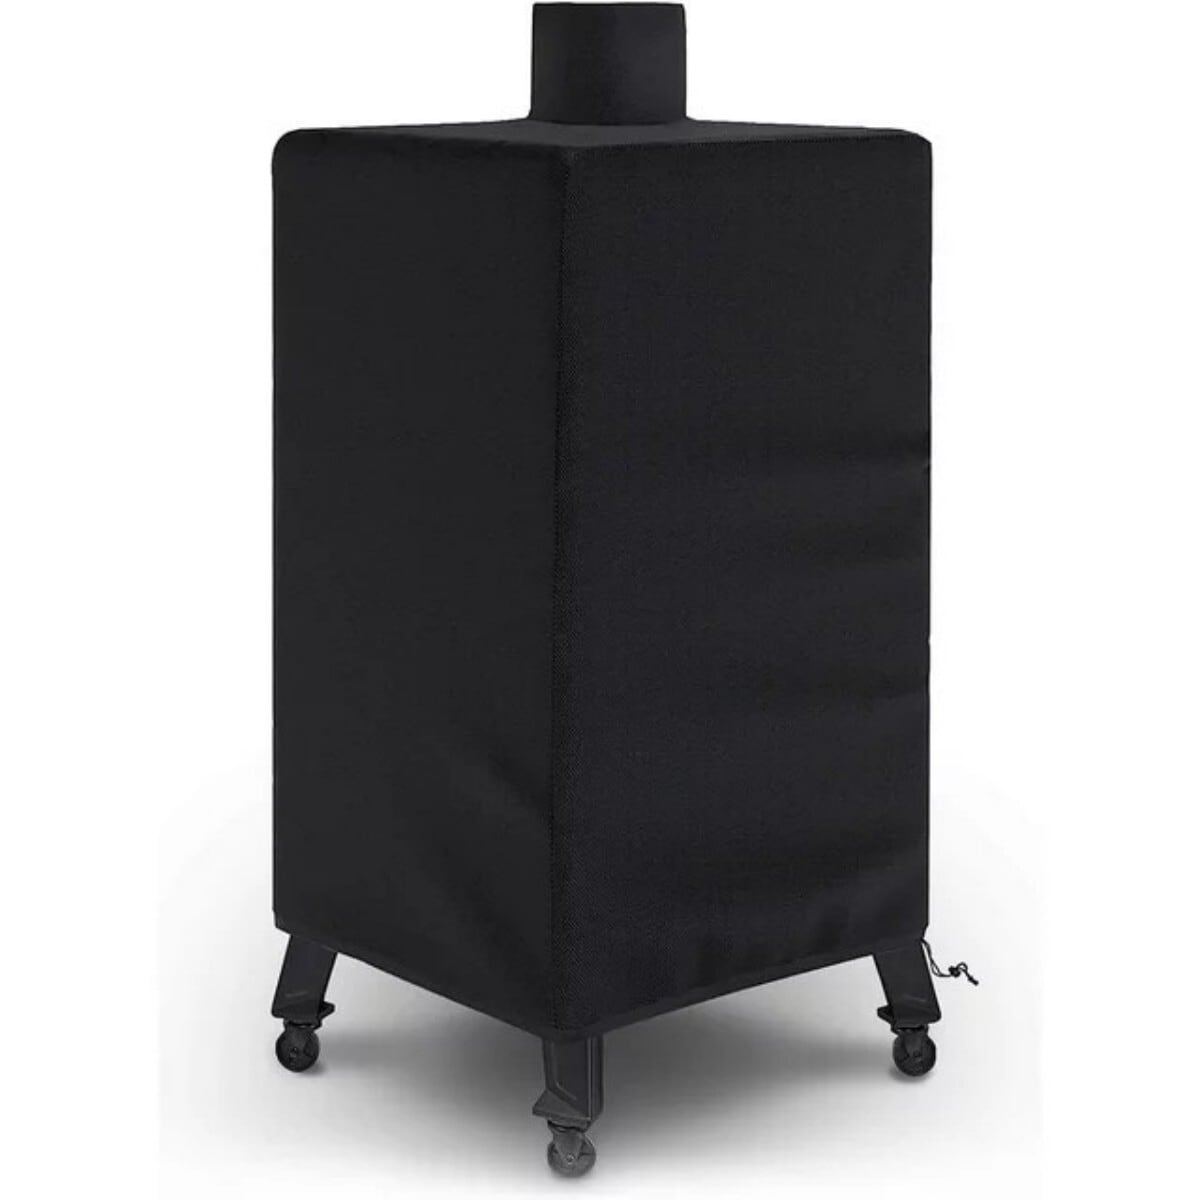 https://ak1.ostkcdn.com/images/products/is/images/direct/7c9427a20cc144d2ca86ec487c5124fac5fd3a4e/Pellet-Electric-Smoker-Cover--Waterproof-Fade-Resistant-Square-Vertical-Heavy-Duty-UV-Resistant.jpg